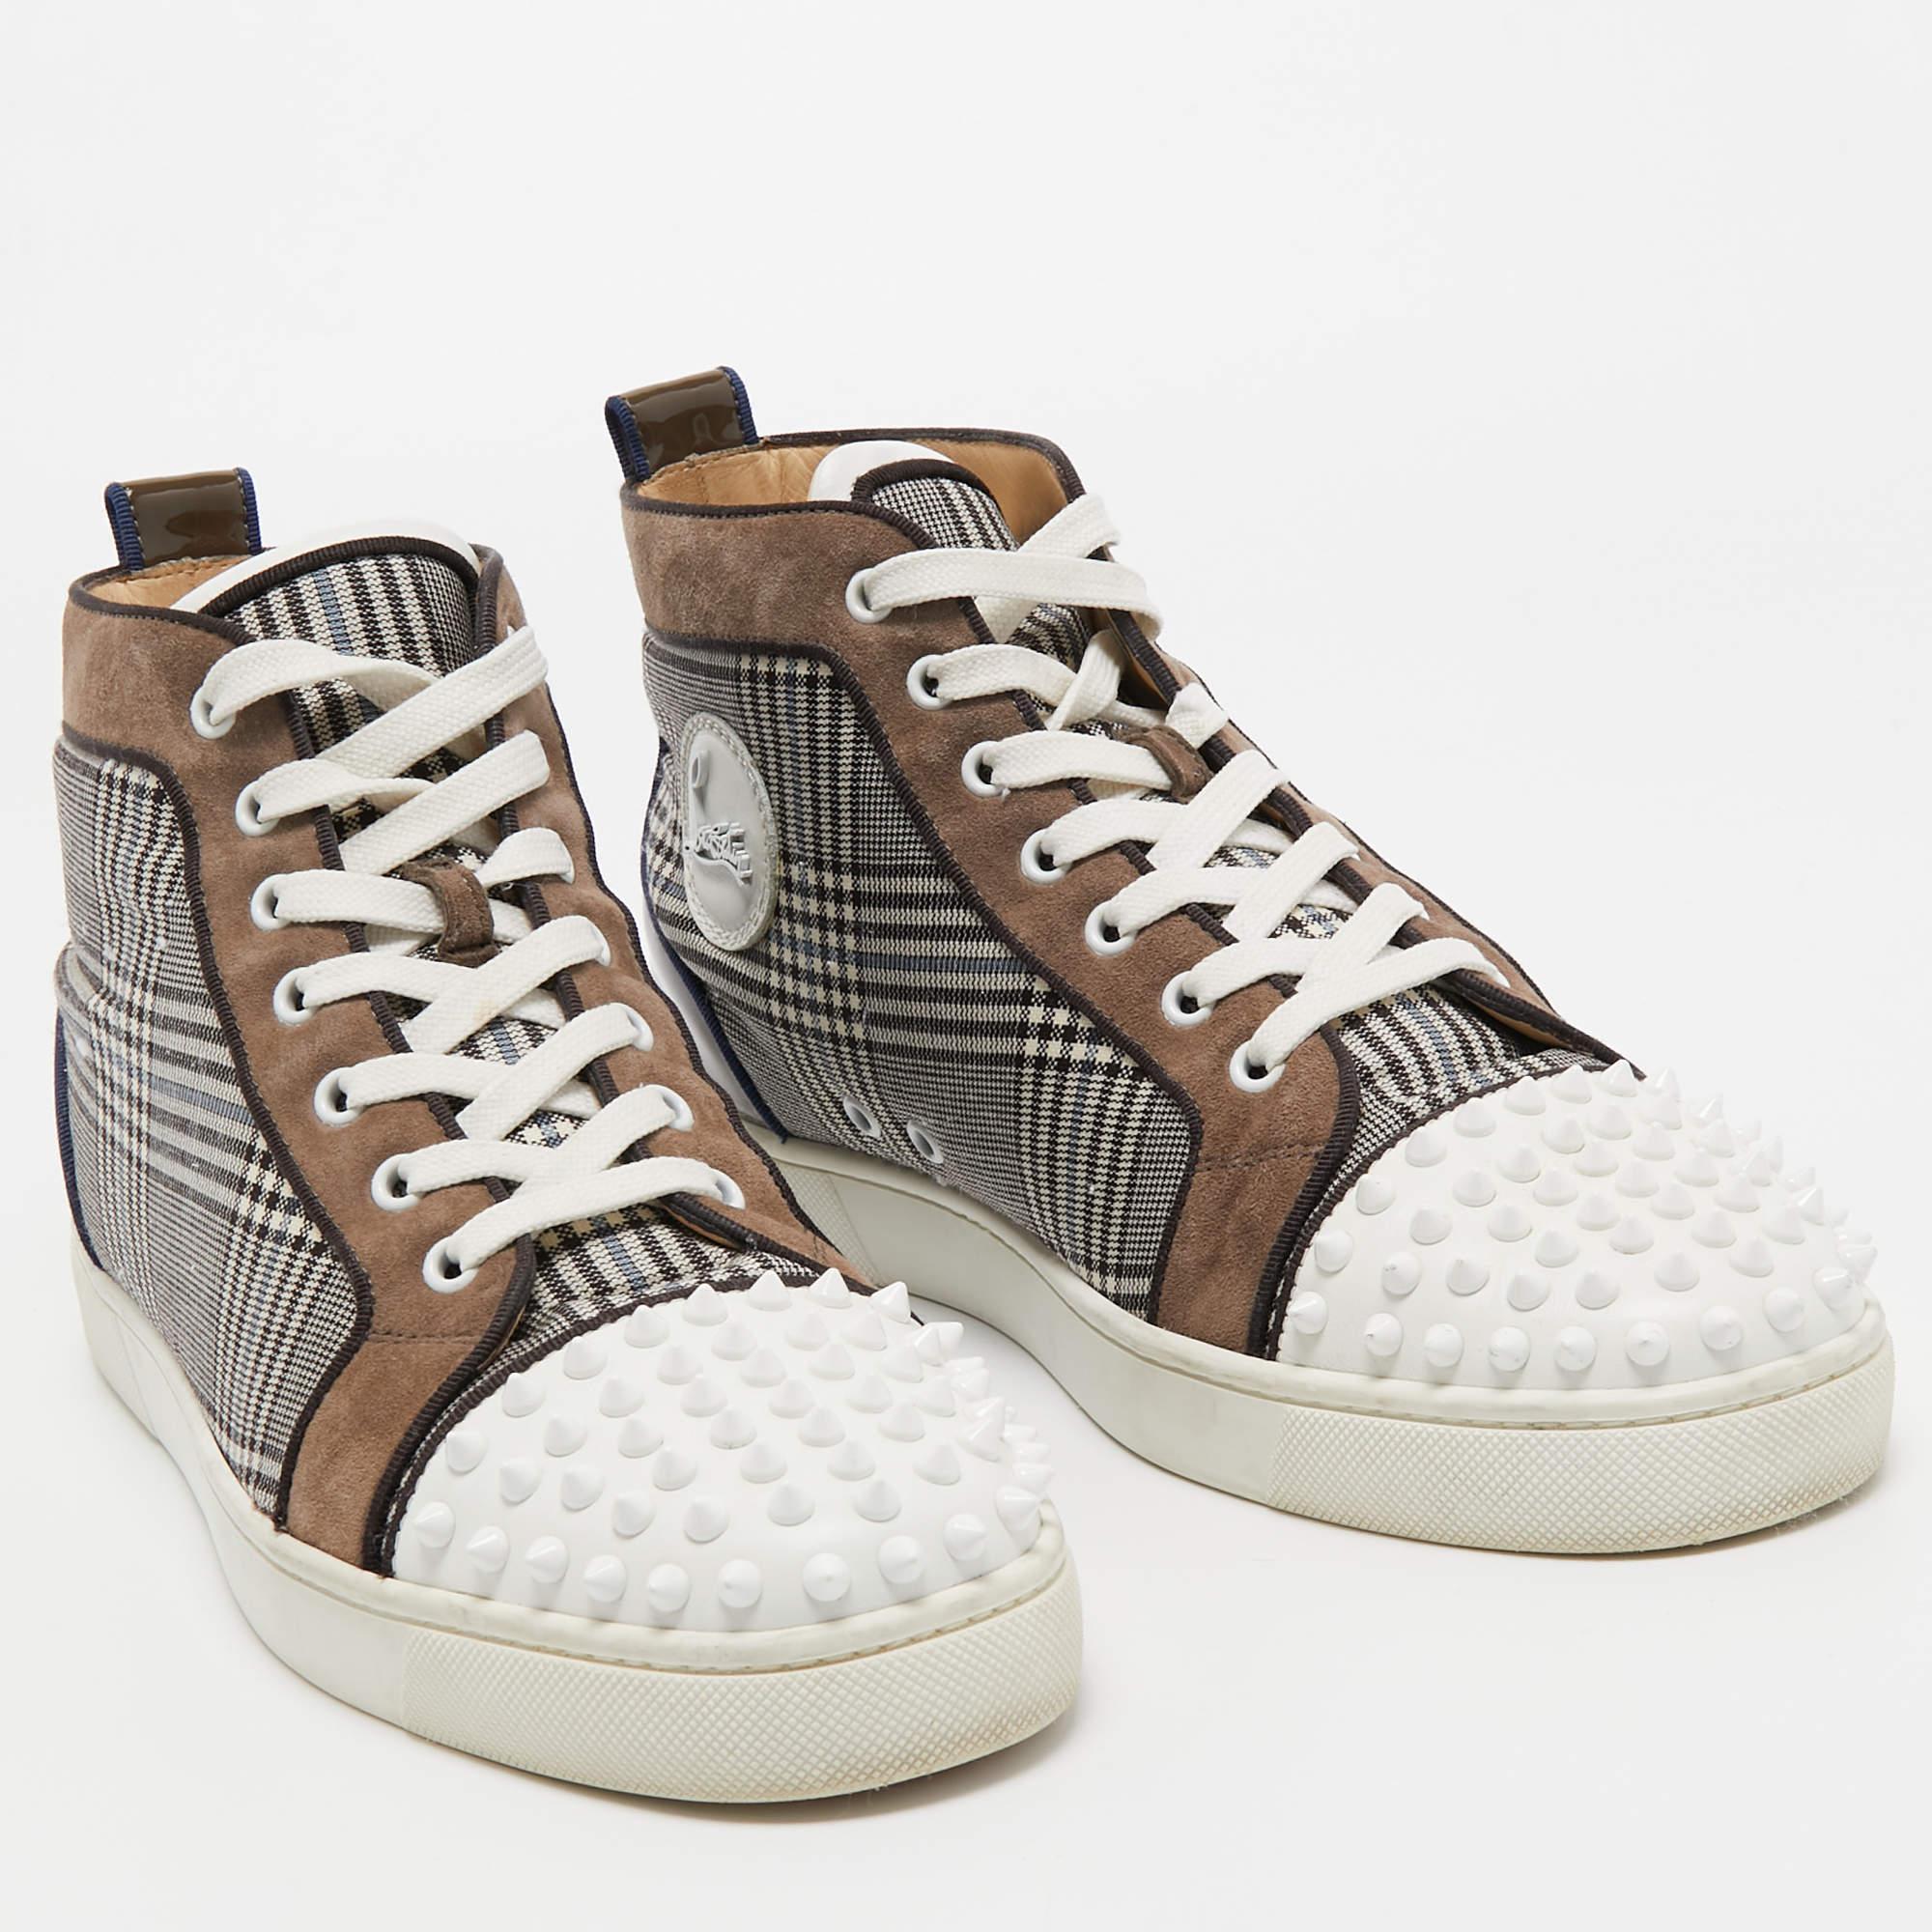 Christian Louboutin Multicolor Check Louis Spike High Top Sneakers Size 42.5 For Sale 3